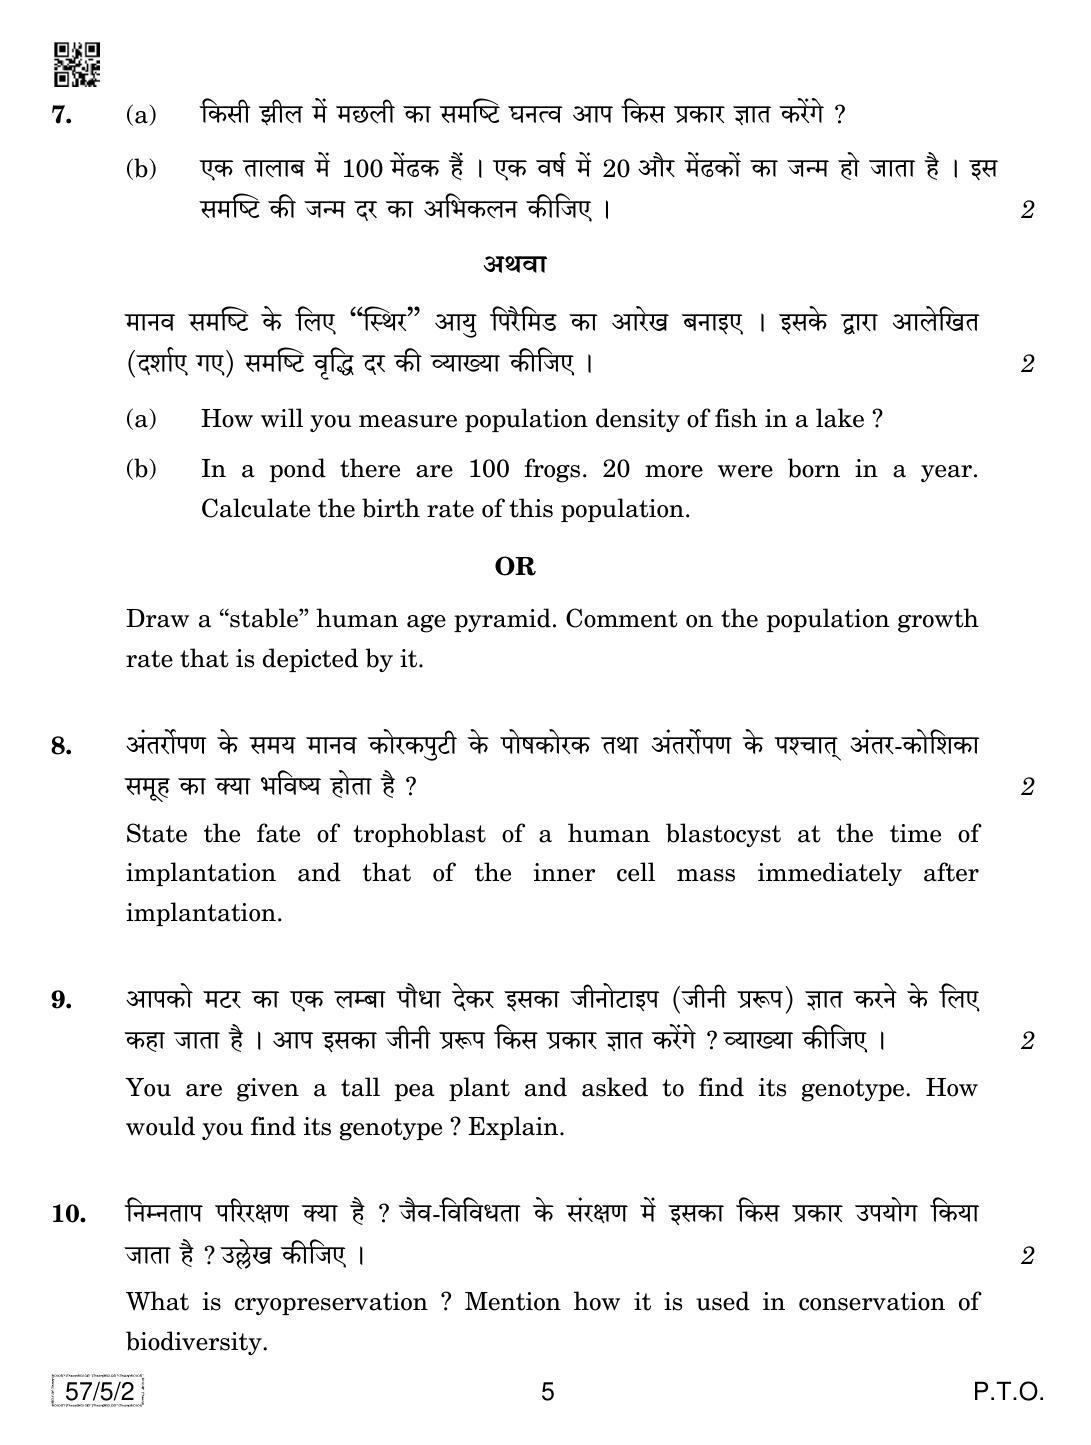 CBSE Class 12 57-5-2 Biology 2019 Question Paper - Page 5